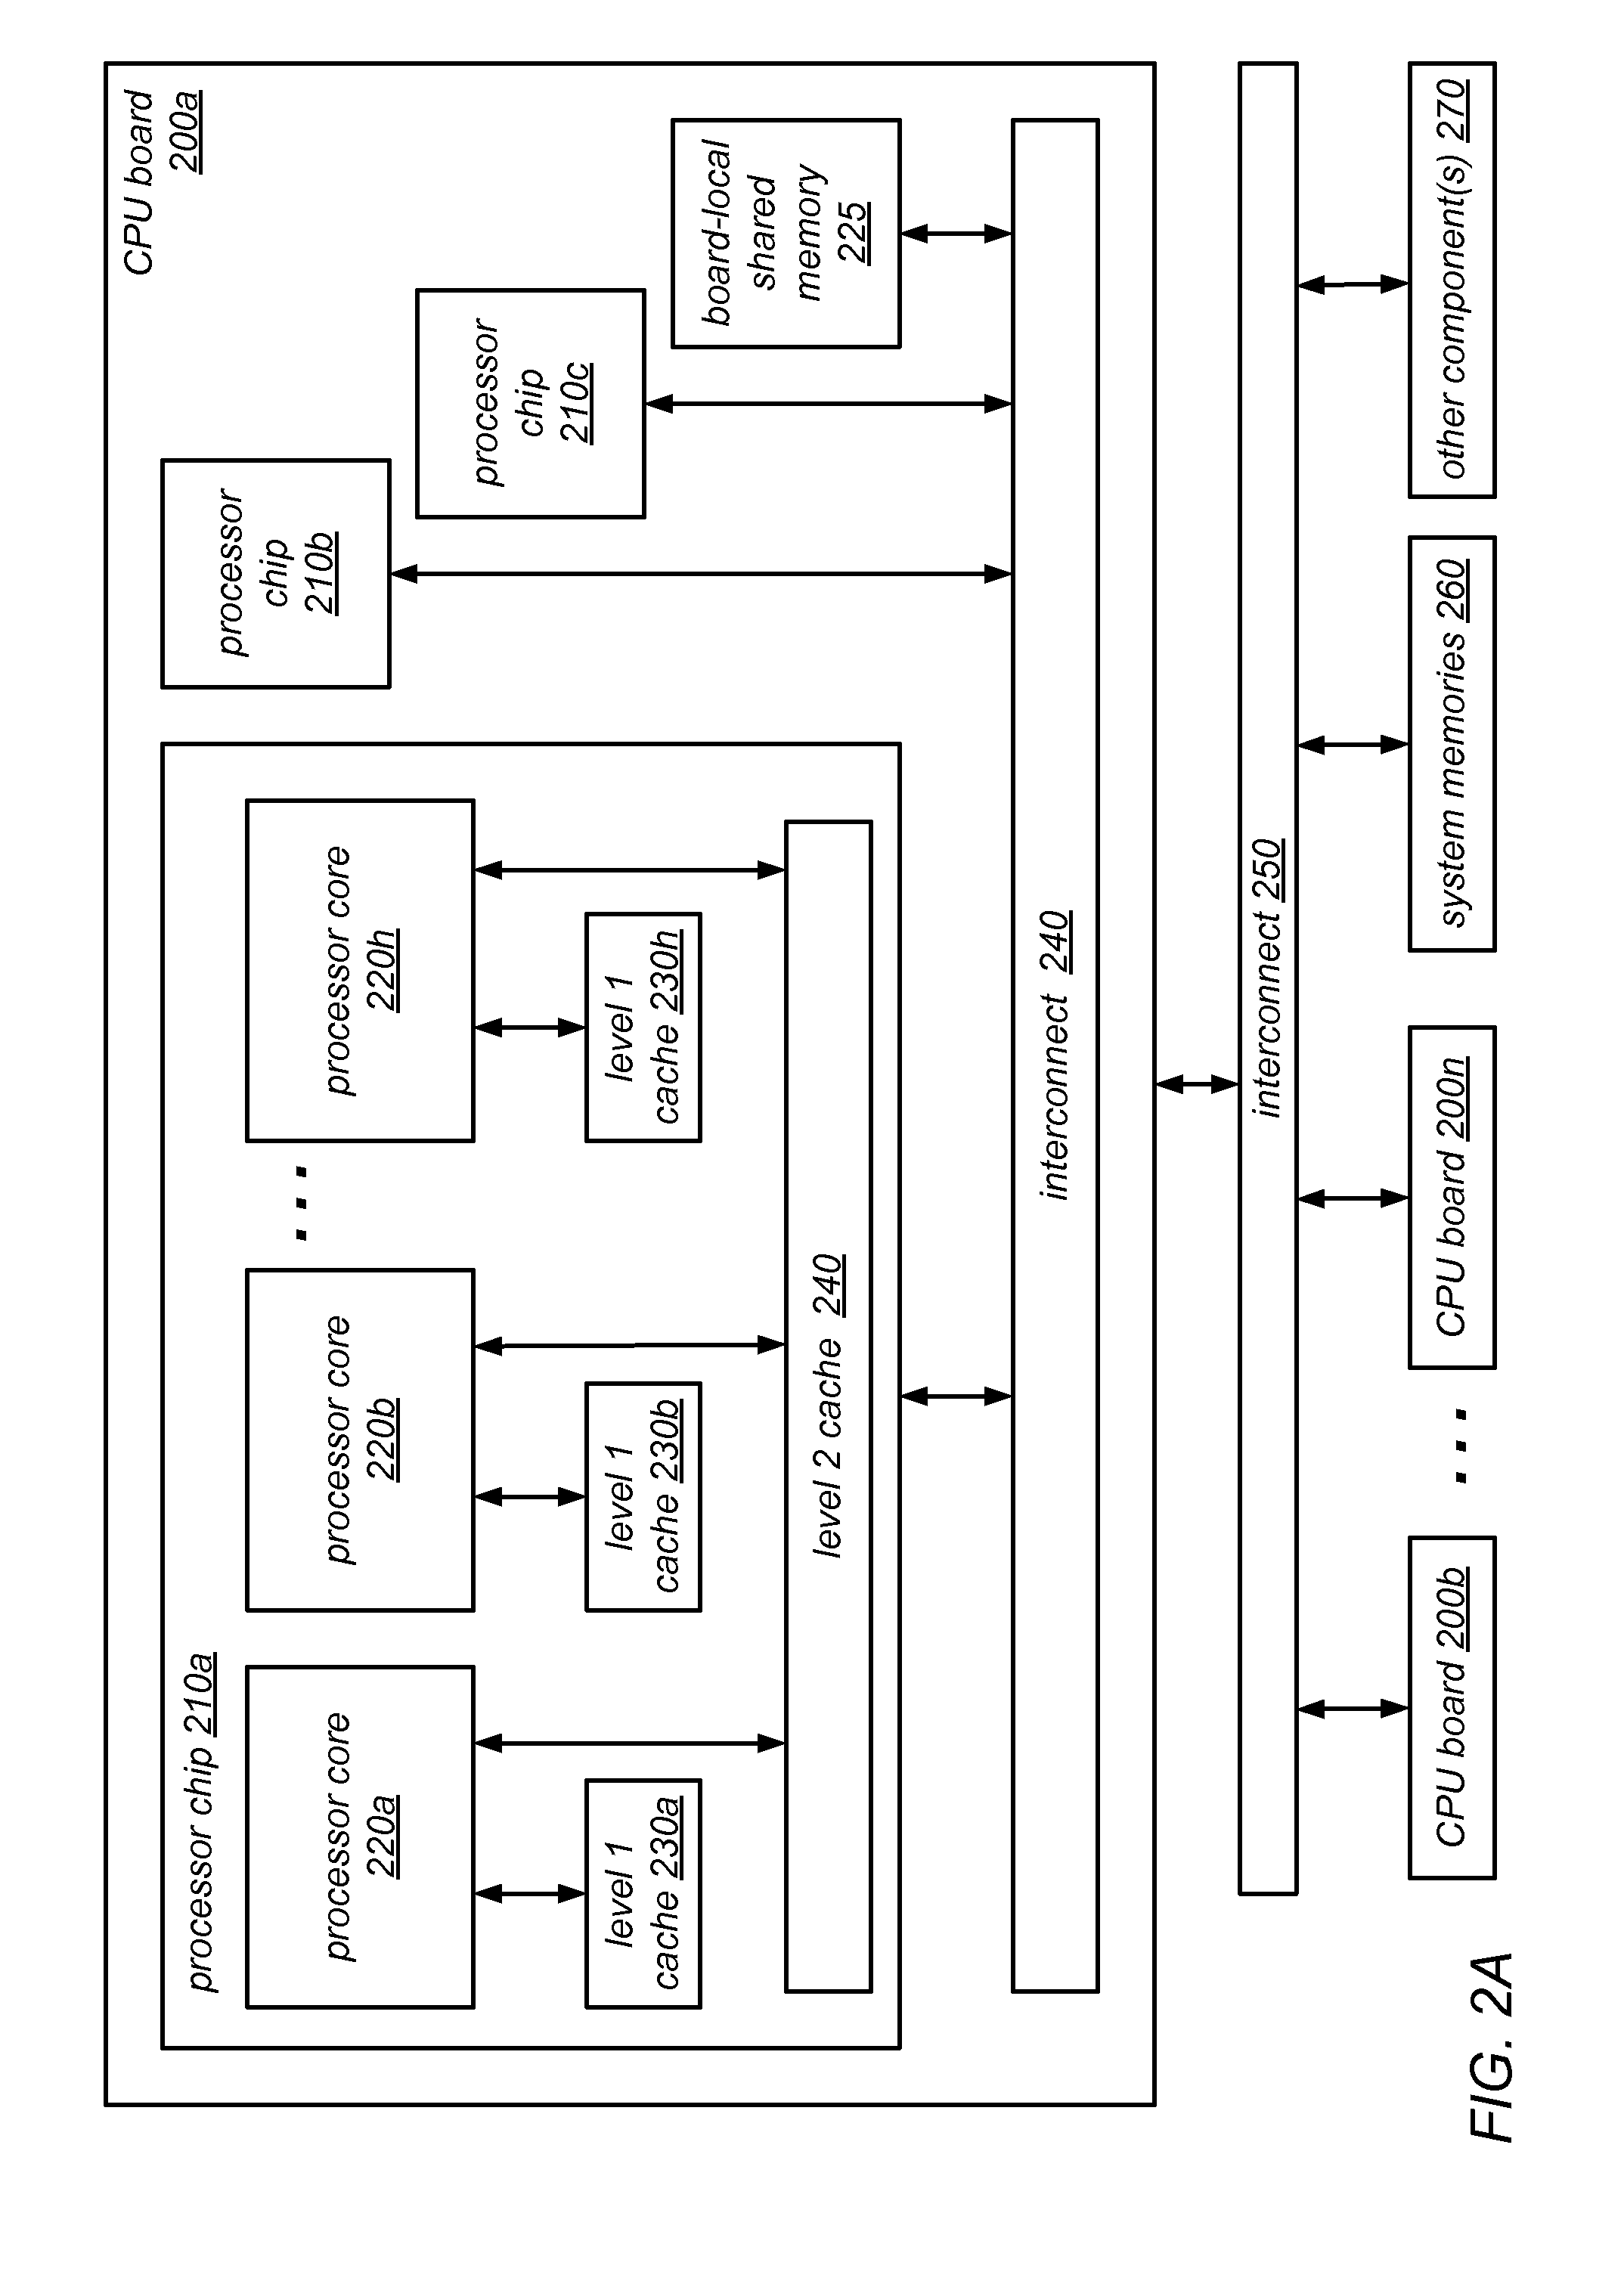 System and Method for Implementing NUMA-Aware Reader-Writer Locks